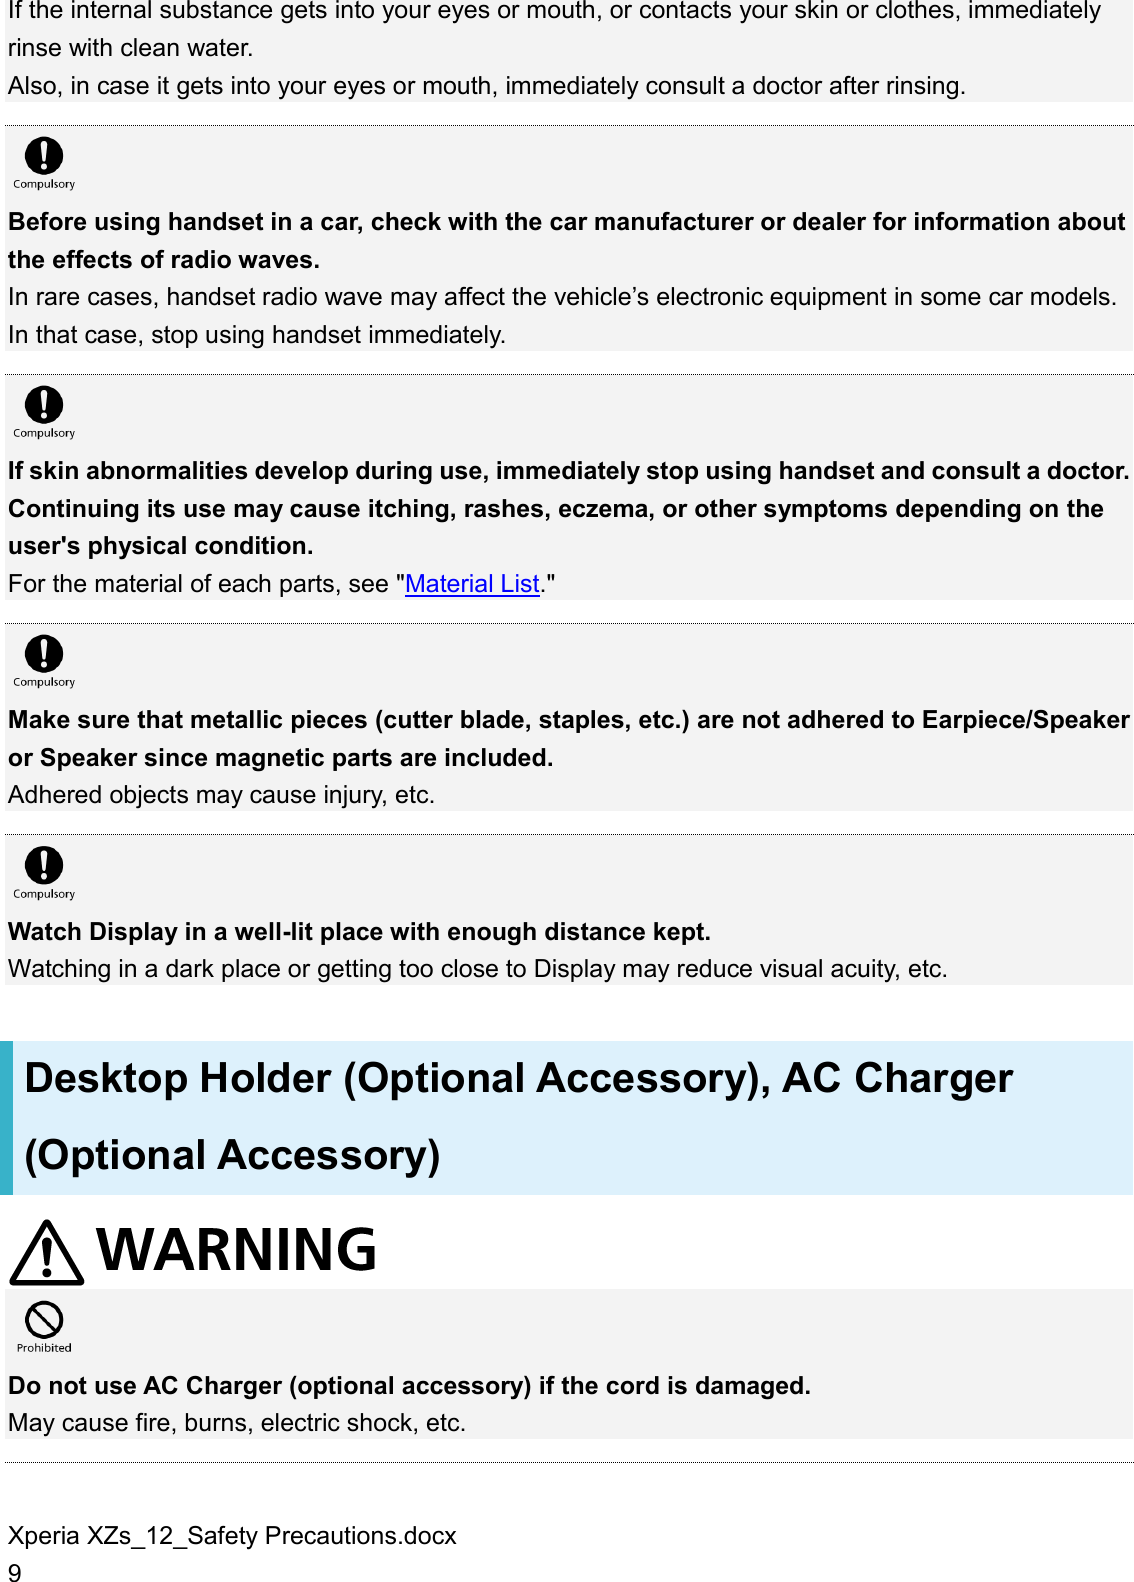 Xperia XZs_12_Safety Precautions.docx 9 If the internal substance gets into your eyes or mouth, or contacts your skin or clothes, immediately rinse with clean water. Also, in case it gets into your eyes or mouth, immediately consult a doctor after rinsing.   Before using handset in a car, check with the car manufacturer or dealer for information about the effects of radio waves. In rare cases, handset radio wave may affect the vehicle’s electronic equipment in some car models. In that case, stop using handset immediately.   If skin abnormalities develop during use, immediately stop using handset and consult a doctor. Continuing its use may cause itching, rashes, eczema, or other symptoms depending on the user&apos;s physical condition. For the material of each parts, see &quot;Material List.&quot;   Make sure that metallic pieces (cutter blade, staples, etc.) are not adhered to Earpiece/Speaker or Speaker since magnetic parts are included. Adhered objects may cause injury, etc.   Watch Display in a well-lit place with enough distance kept. Watching in a dark place or getting too close to Display may reduce visual acuity, etc. Desktop Holder (Optional Accessory), AC Charger (Optional Accessory)   Do not use AC Charger (optional accessory) if the cord is damaged. May cause fire, burns, electric shock, etc.  